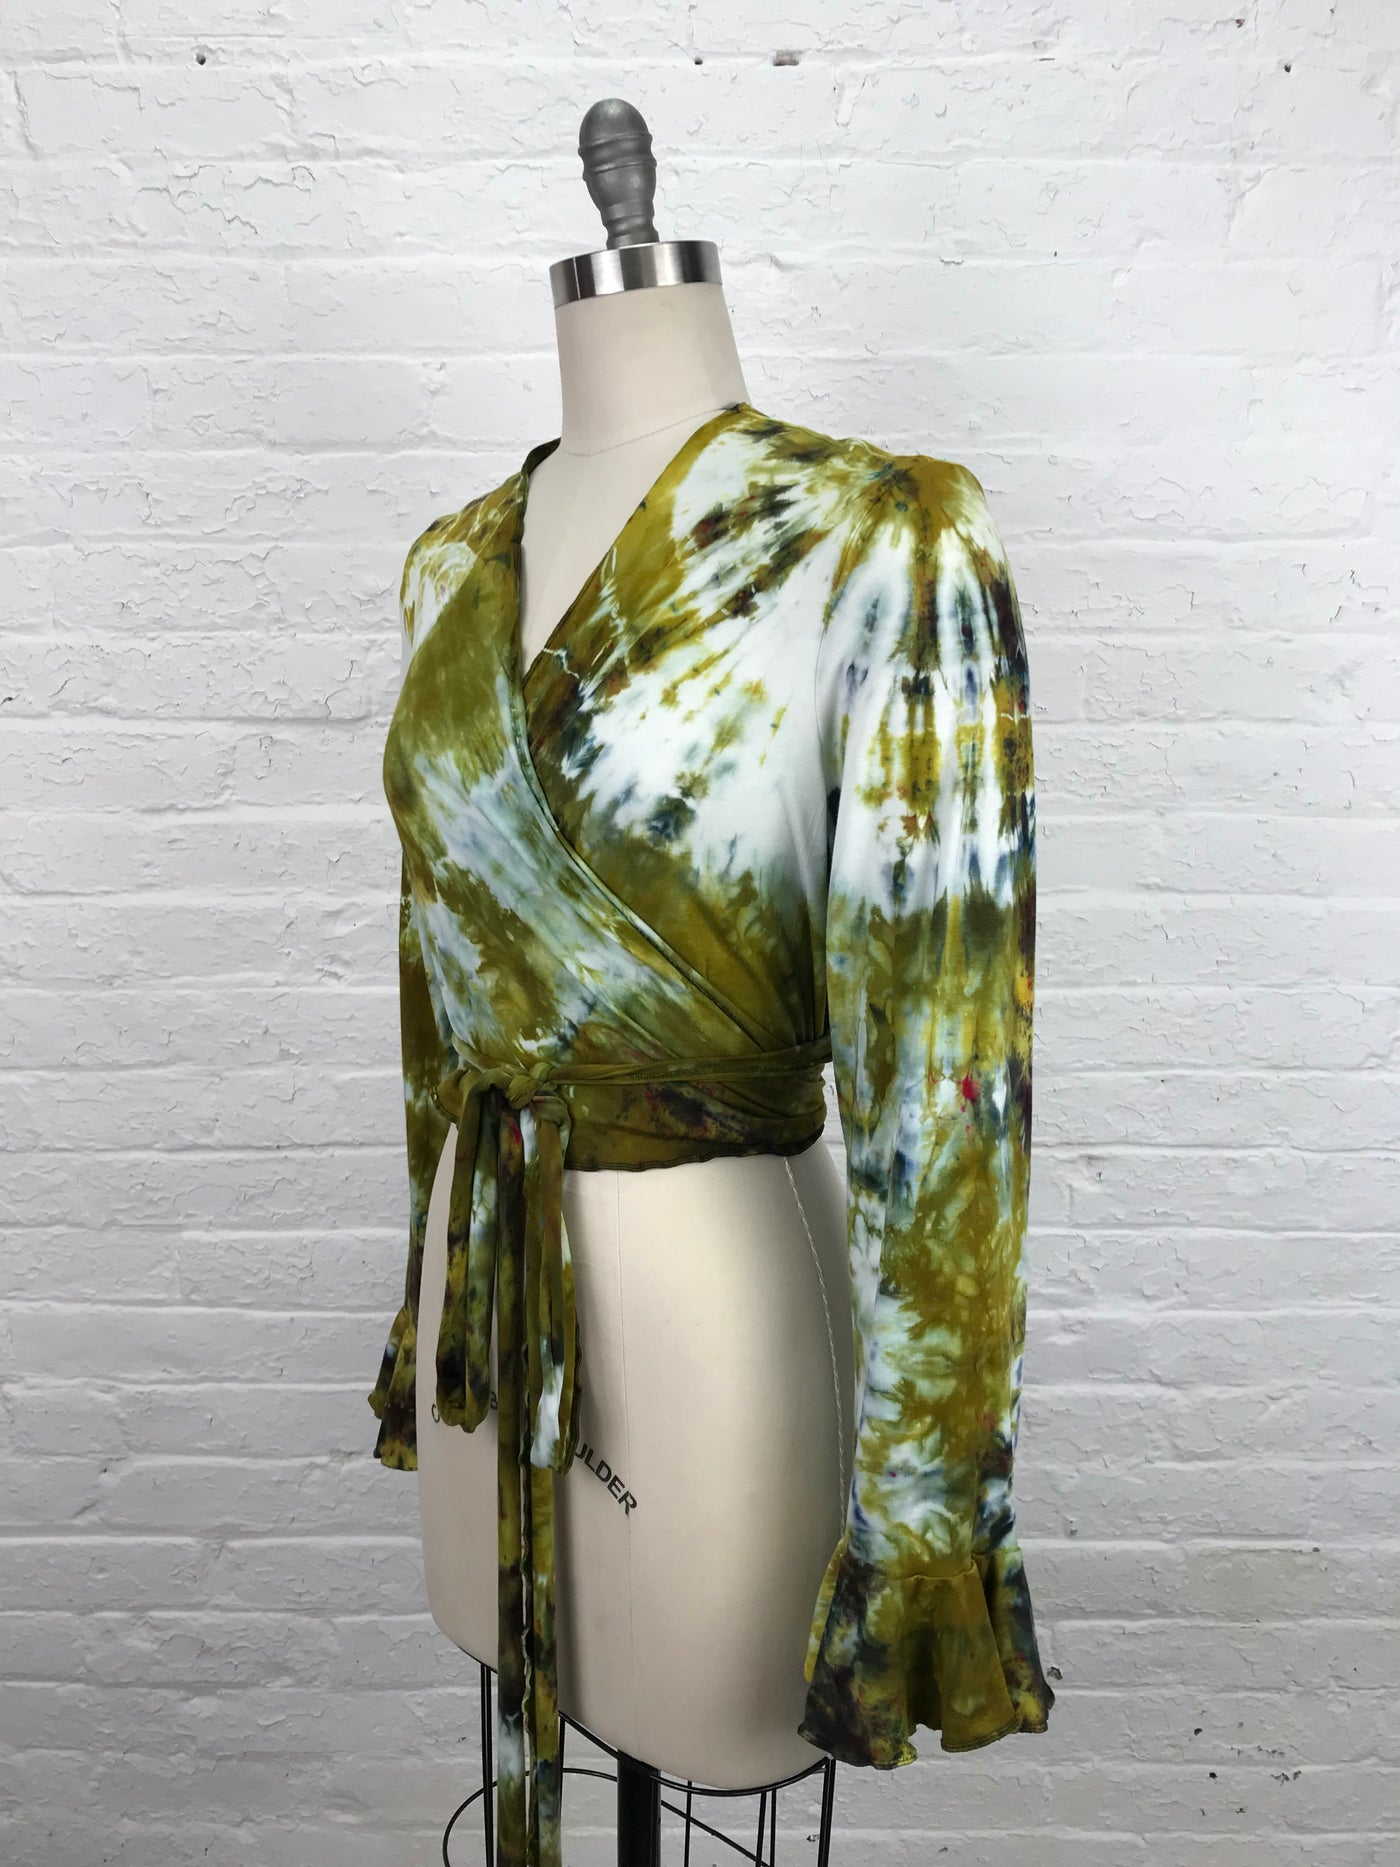 Flamenco Wrap Top in Bombay to Dijon is a petite length wrap top with long sleeves that end in a flounce.  Golden, mustard and cream tones on soft washable bamboo/cotton/spandex jersey fabric - side view